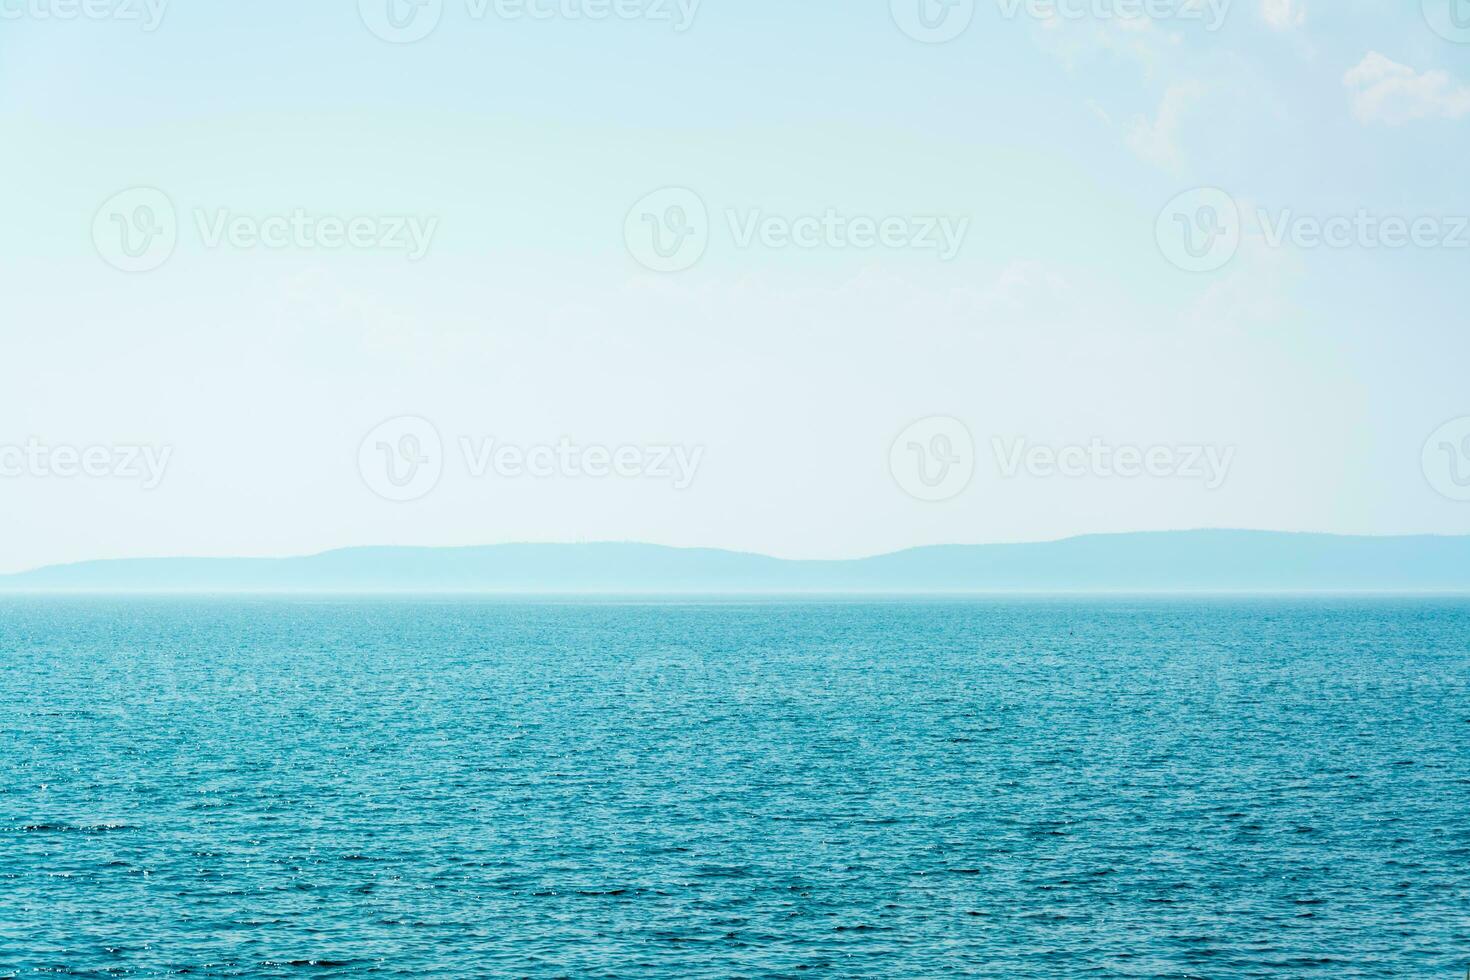 Bay of blue sea and mountains on the horizon. Local tourism photo